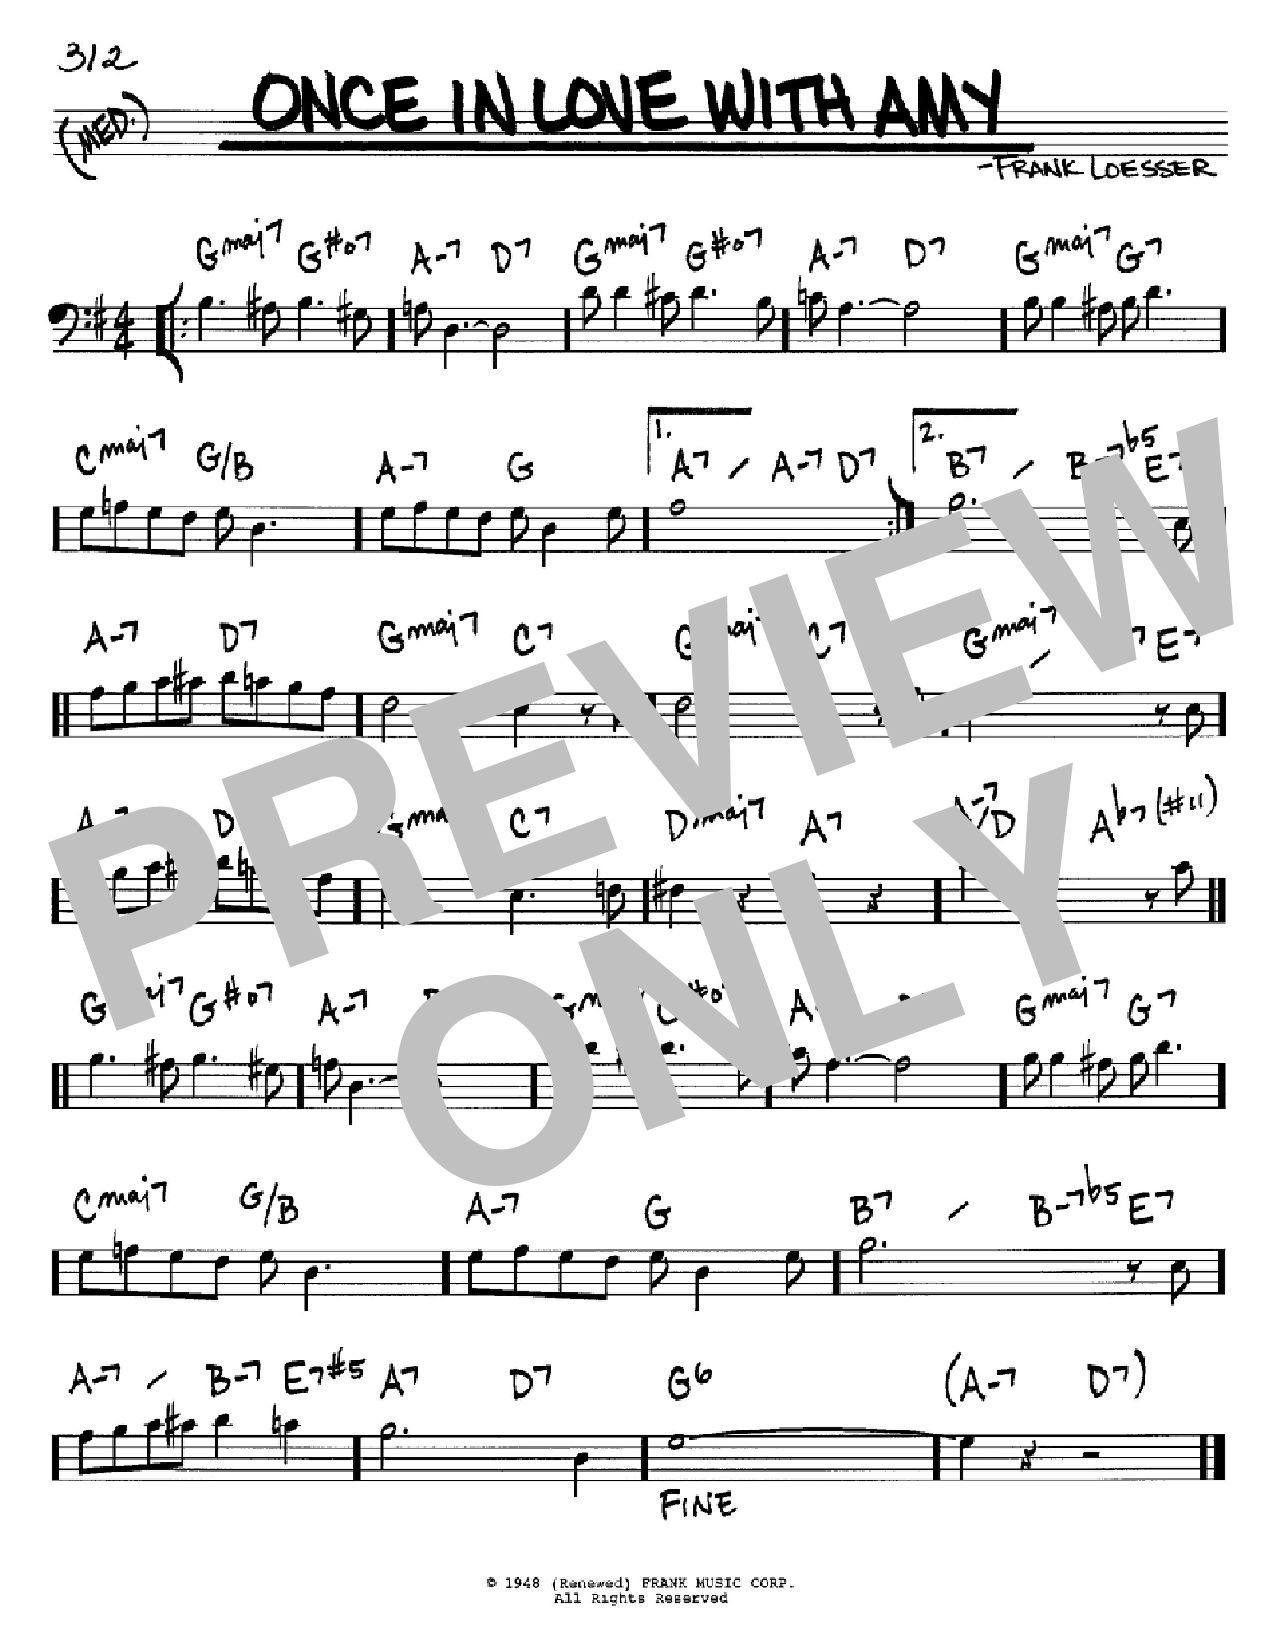 Download Frank Loesser Once In Love With Amy Sheet Music